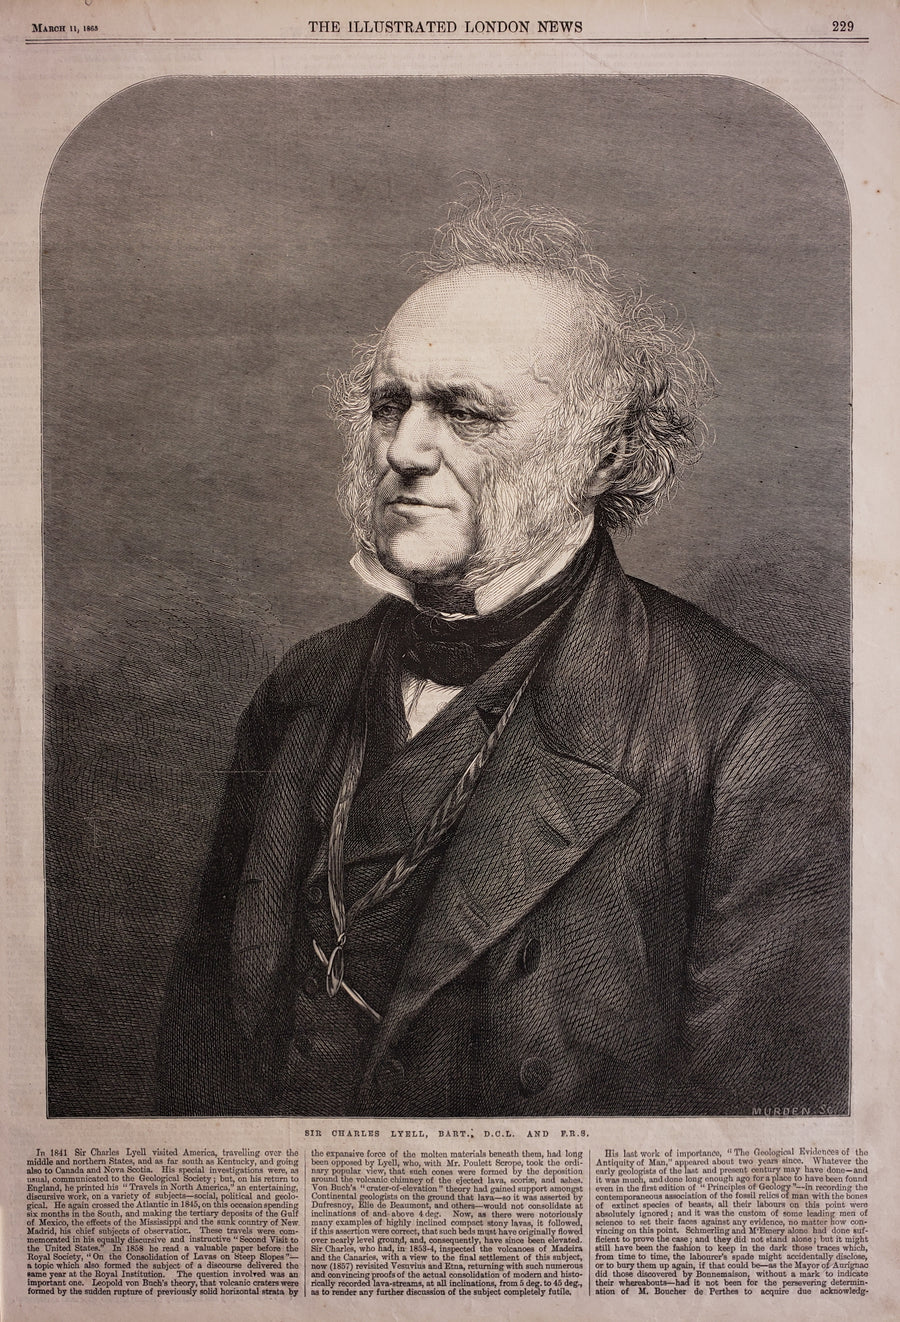 Antique print of Sir Charles Lyell - the London Illustrated News, 1865